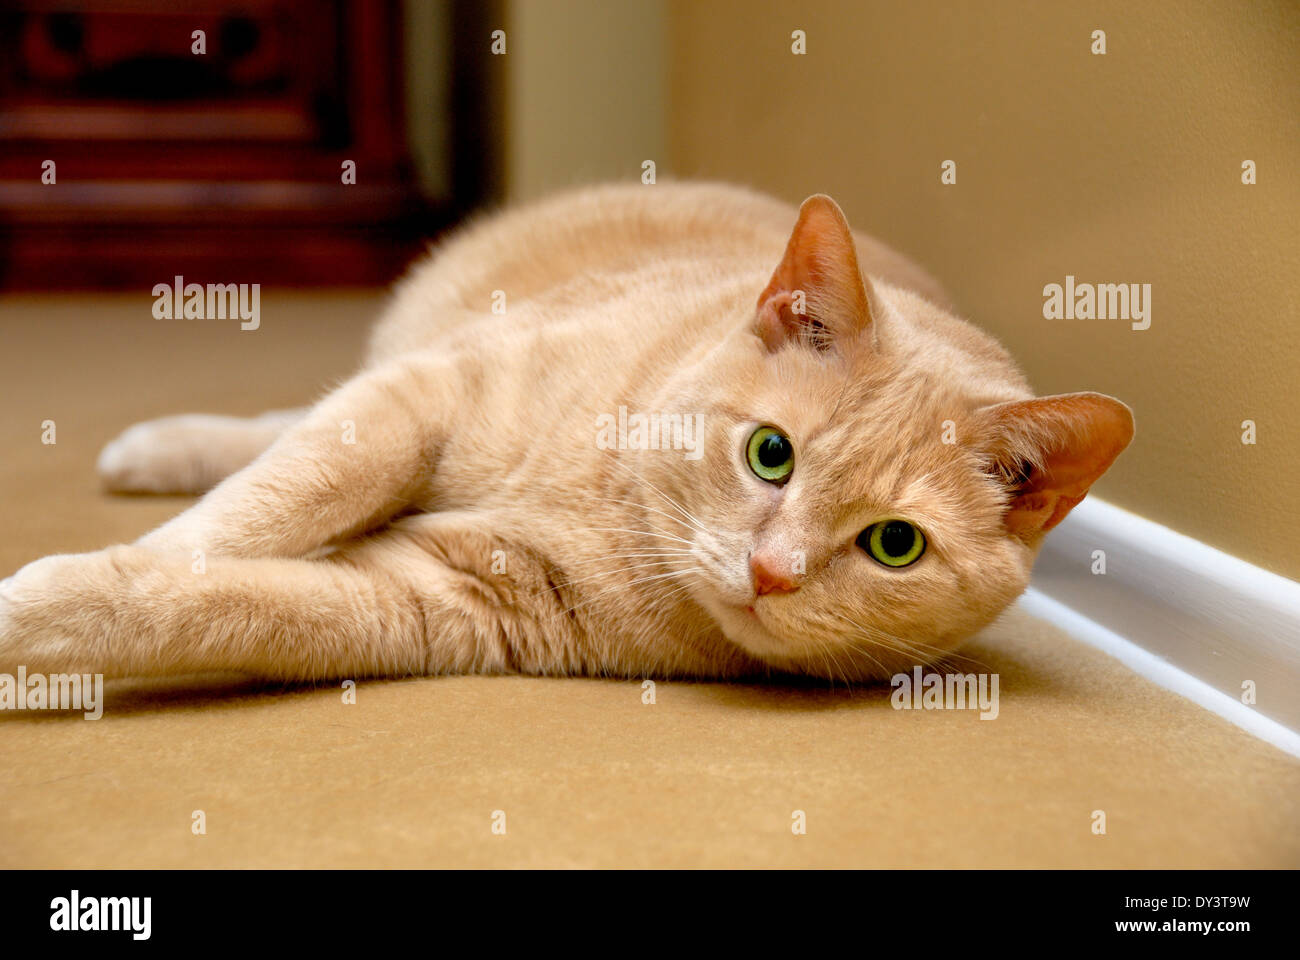 A close up portrait of an orange tabby cat, lying down on carpeting. Stock Photo